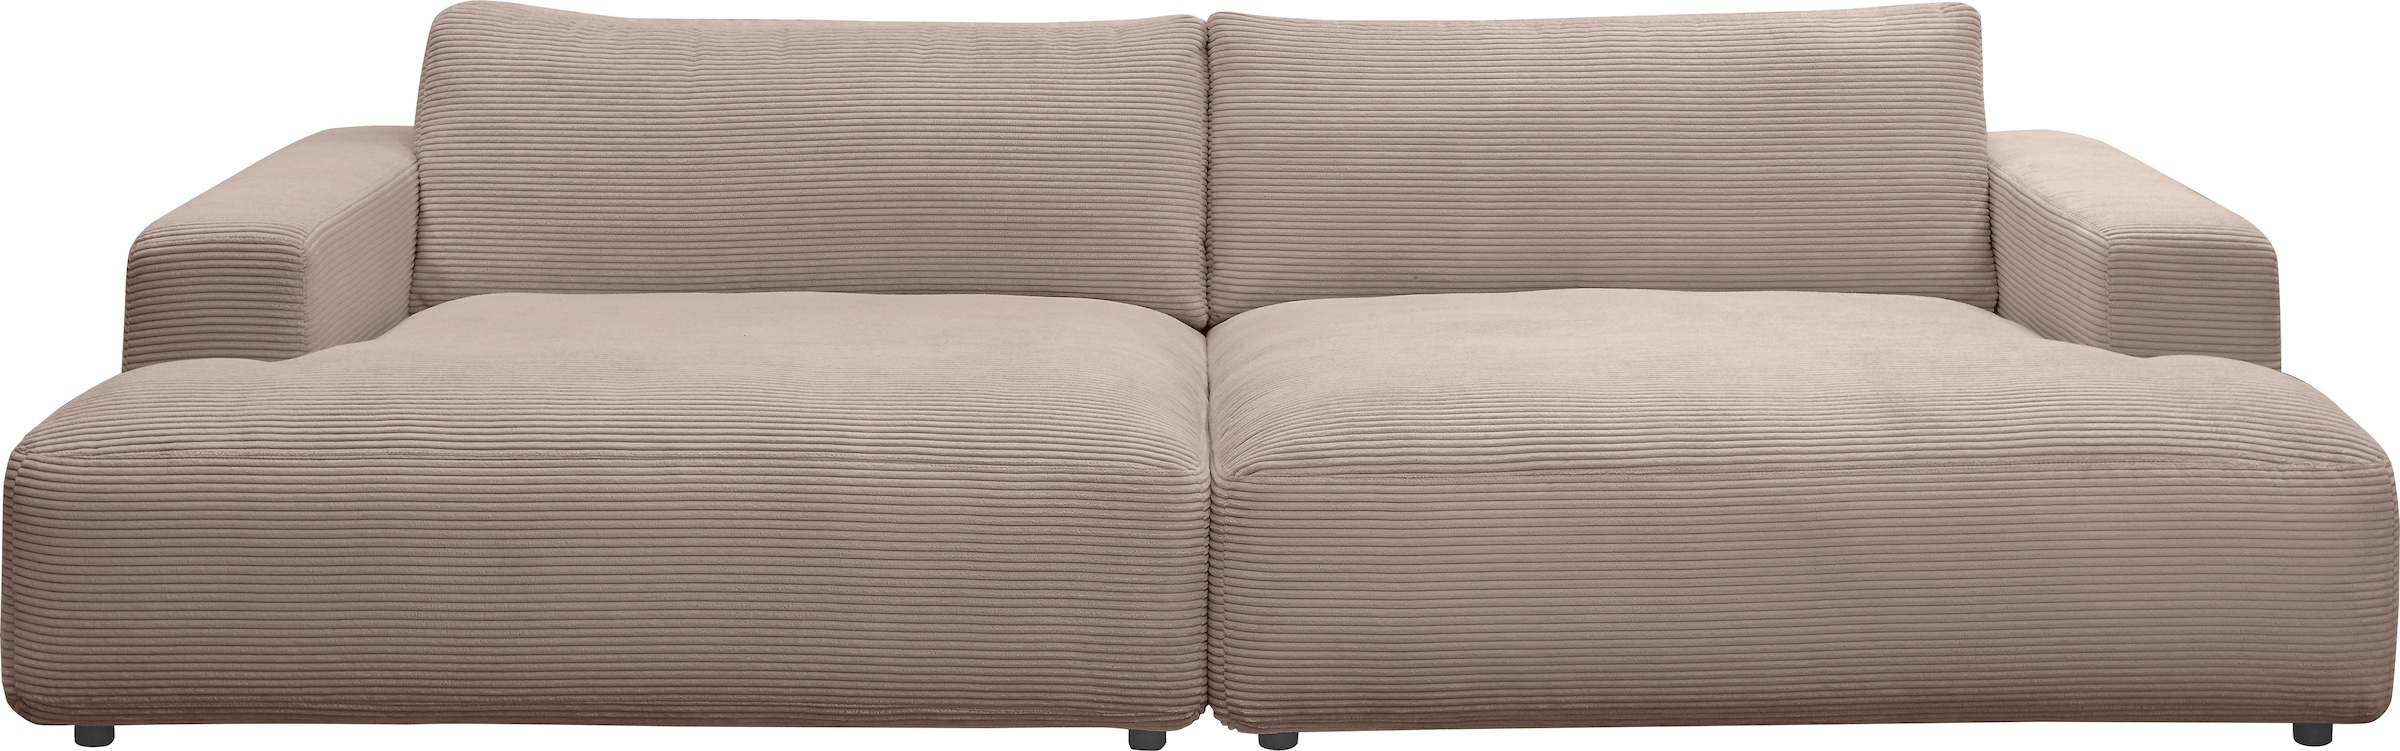 GALLERY M branded by Musterring OTTO Online Loungesofa »Lucia«, Shop cm 292 Breite Cord-Bezug